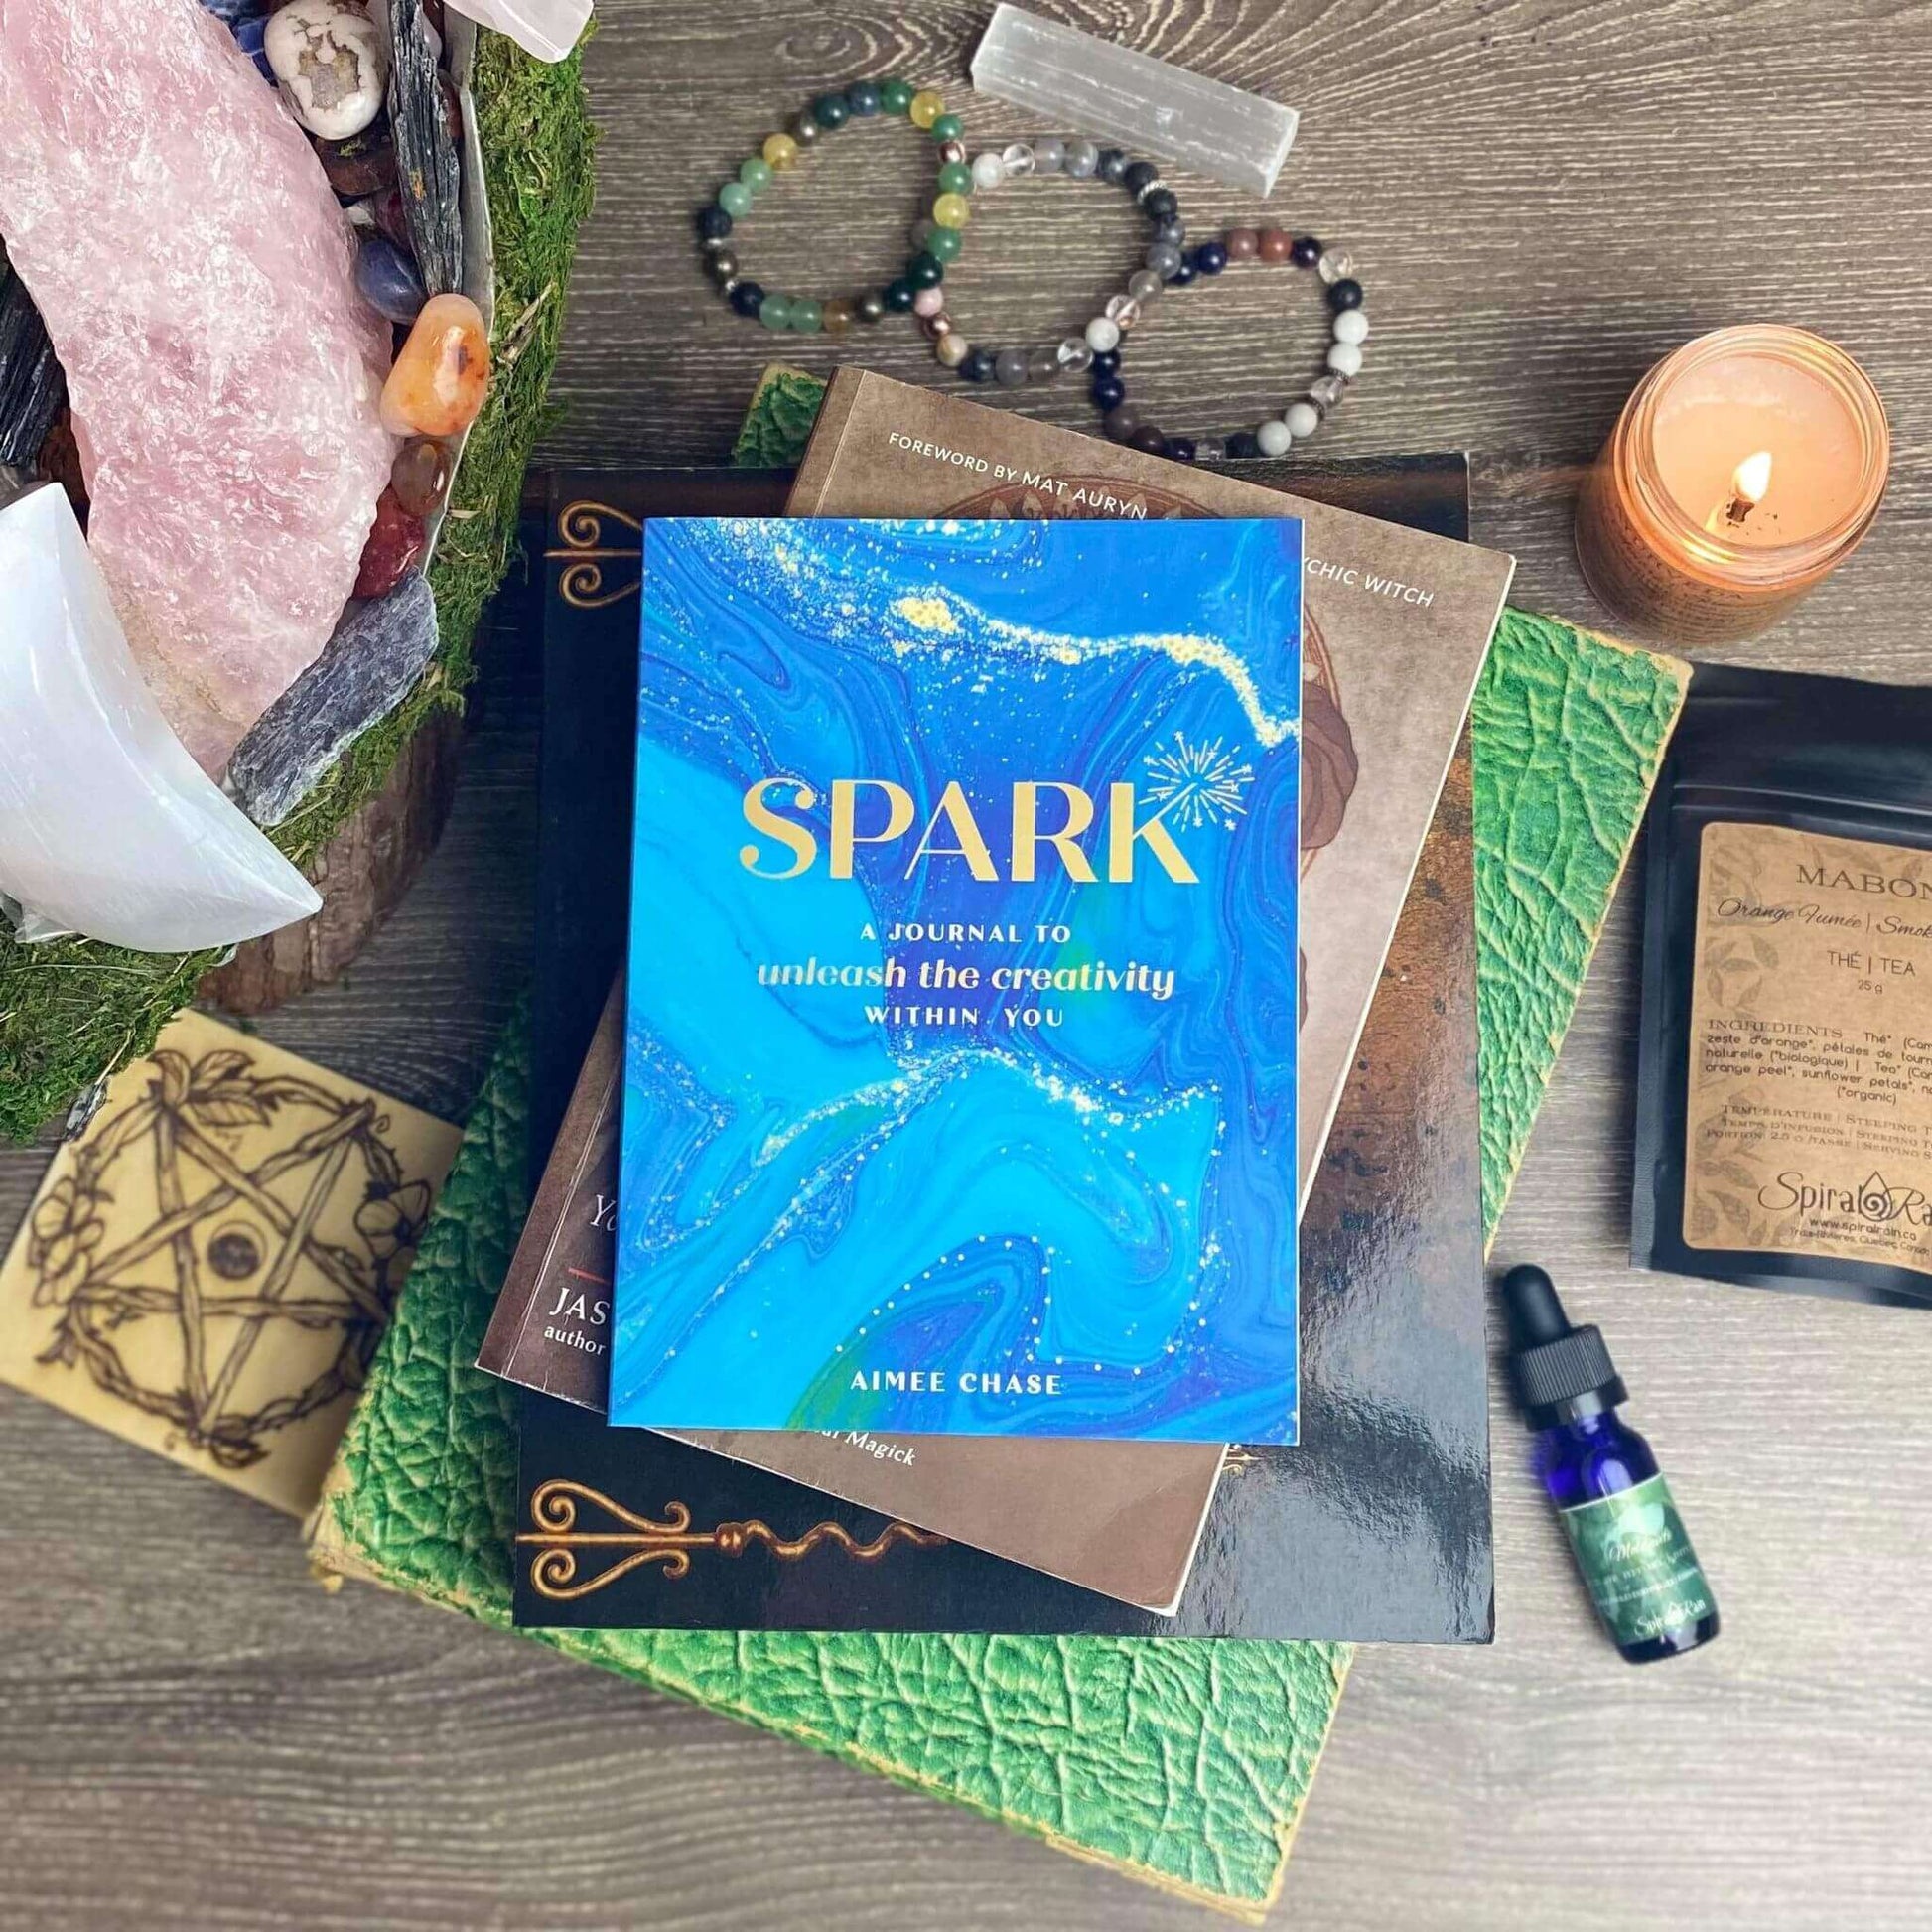 Spark: A Journal to Unleash the Creativity Within You at $15 only from Spiral Rain